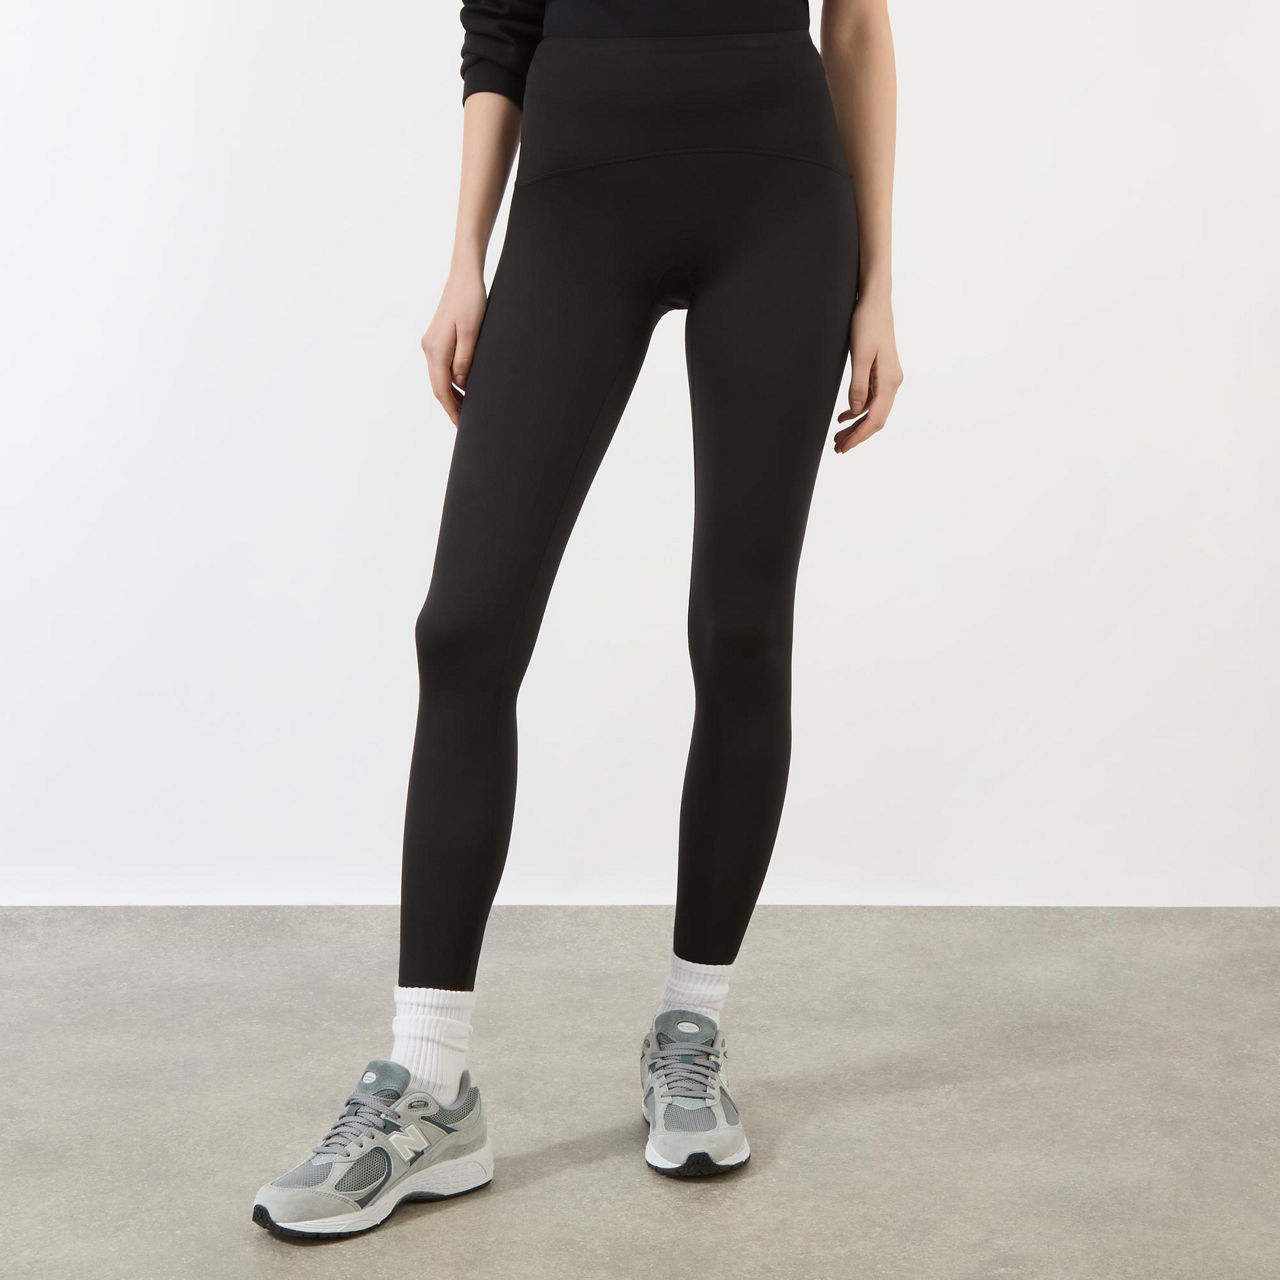 SPANX, Pants & Jumpsuits, Spanx Booty Boost Active 78 Leggings